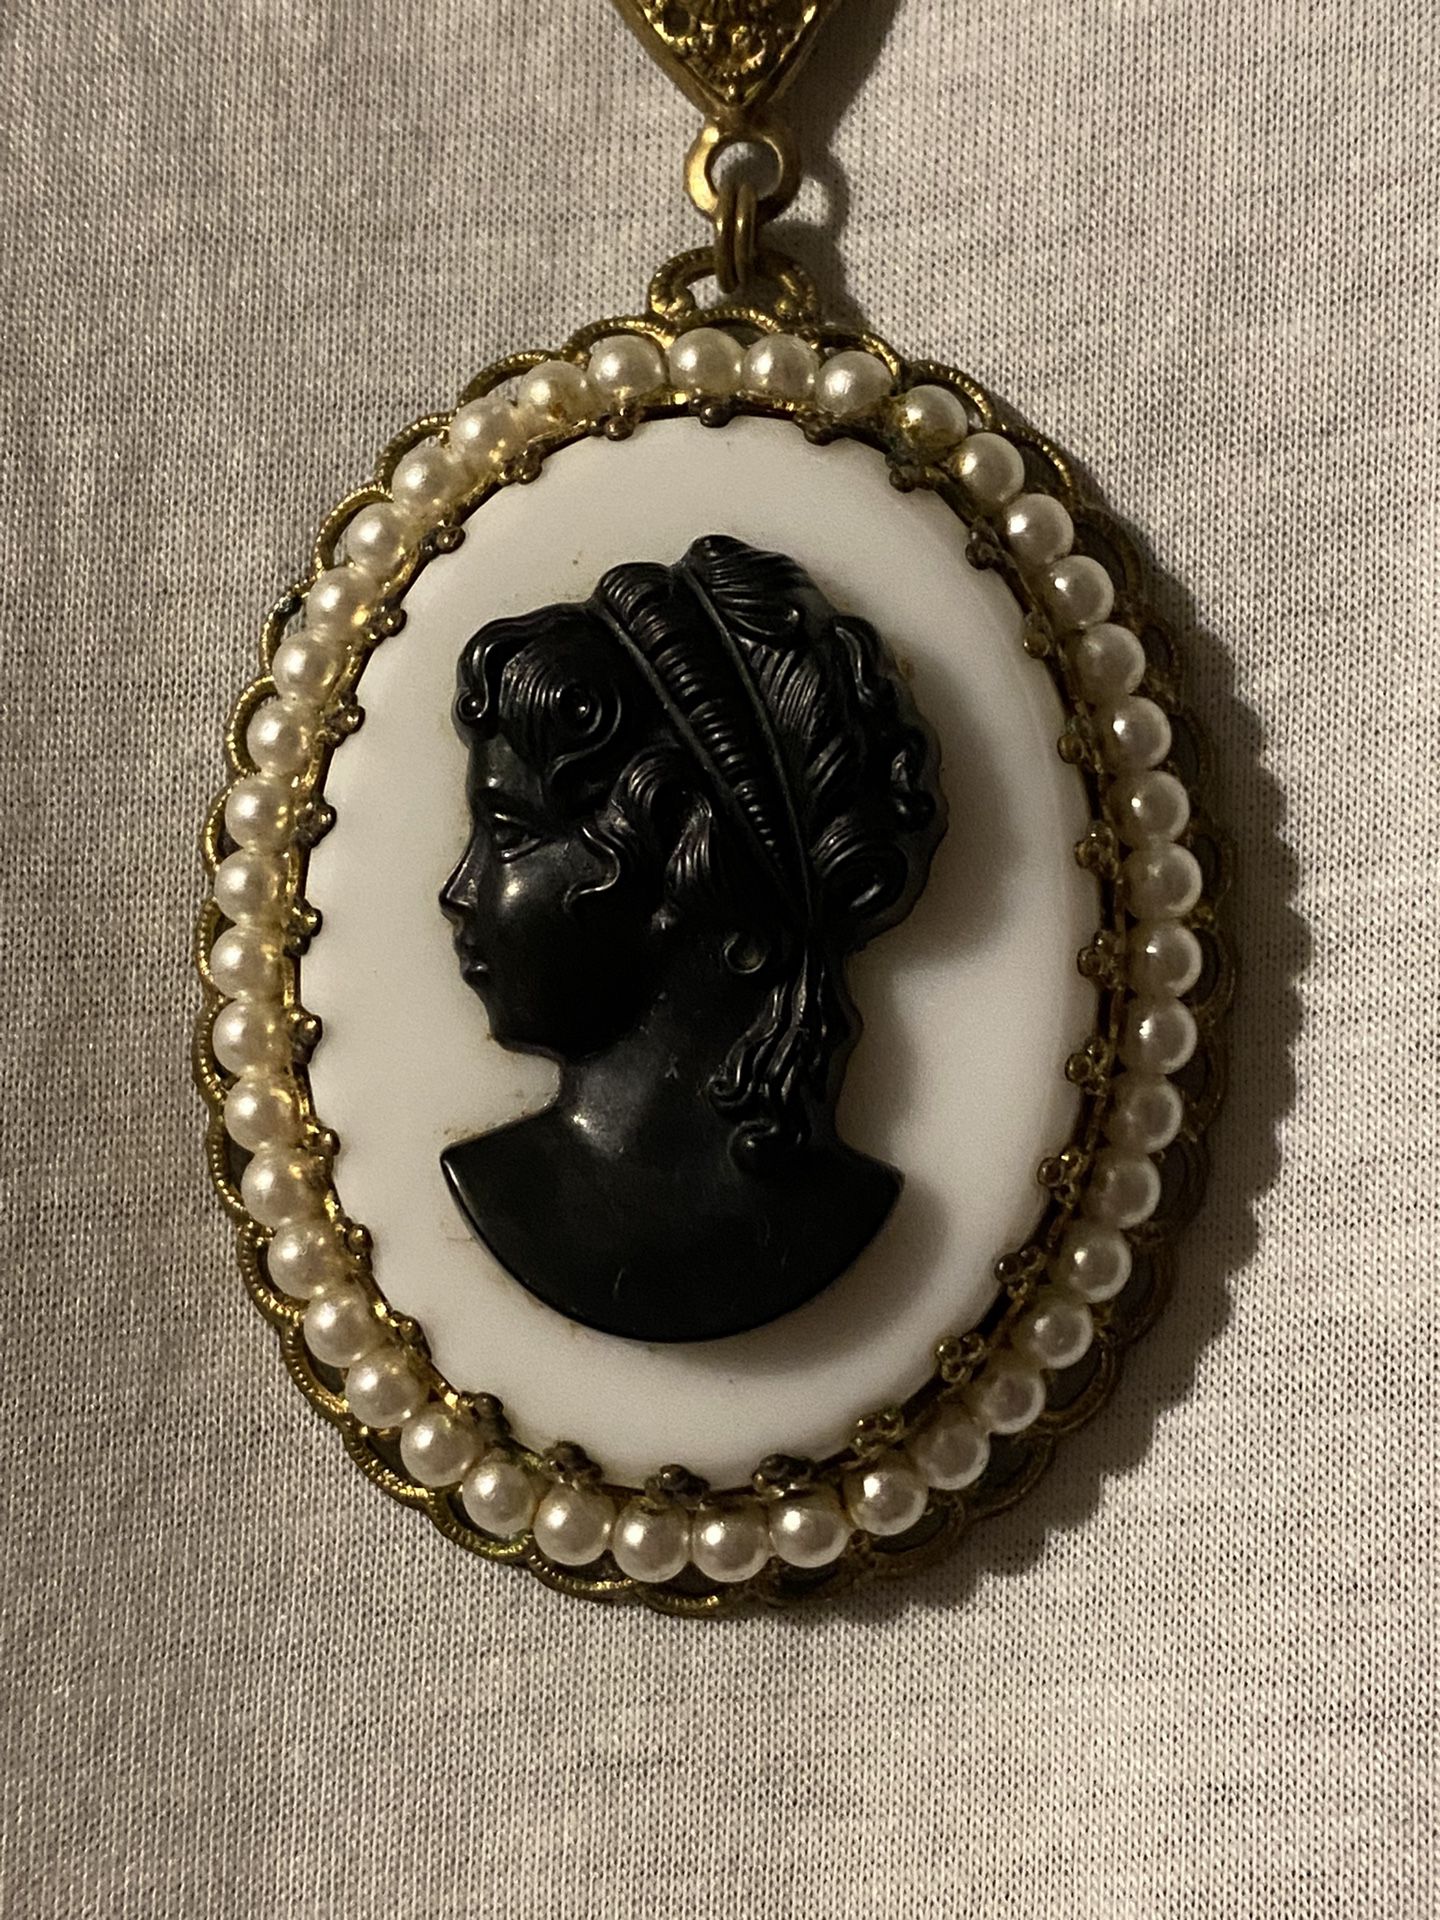 Vintage Cameo Necklace West Germany Filigree Gold Faux Pearl Black White Earring